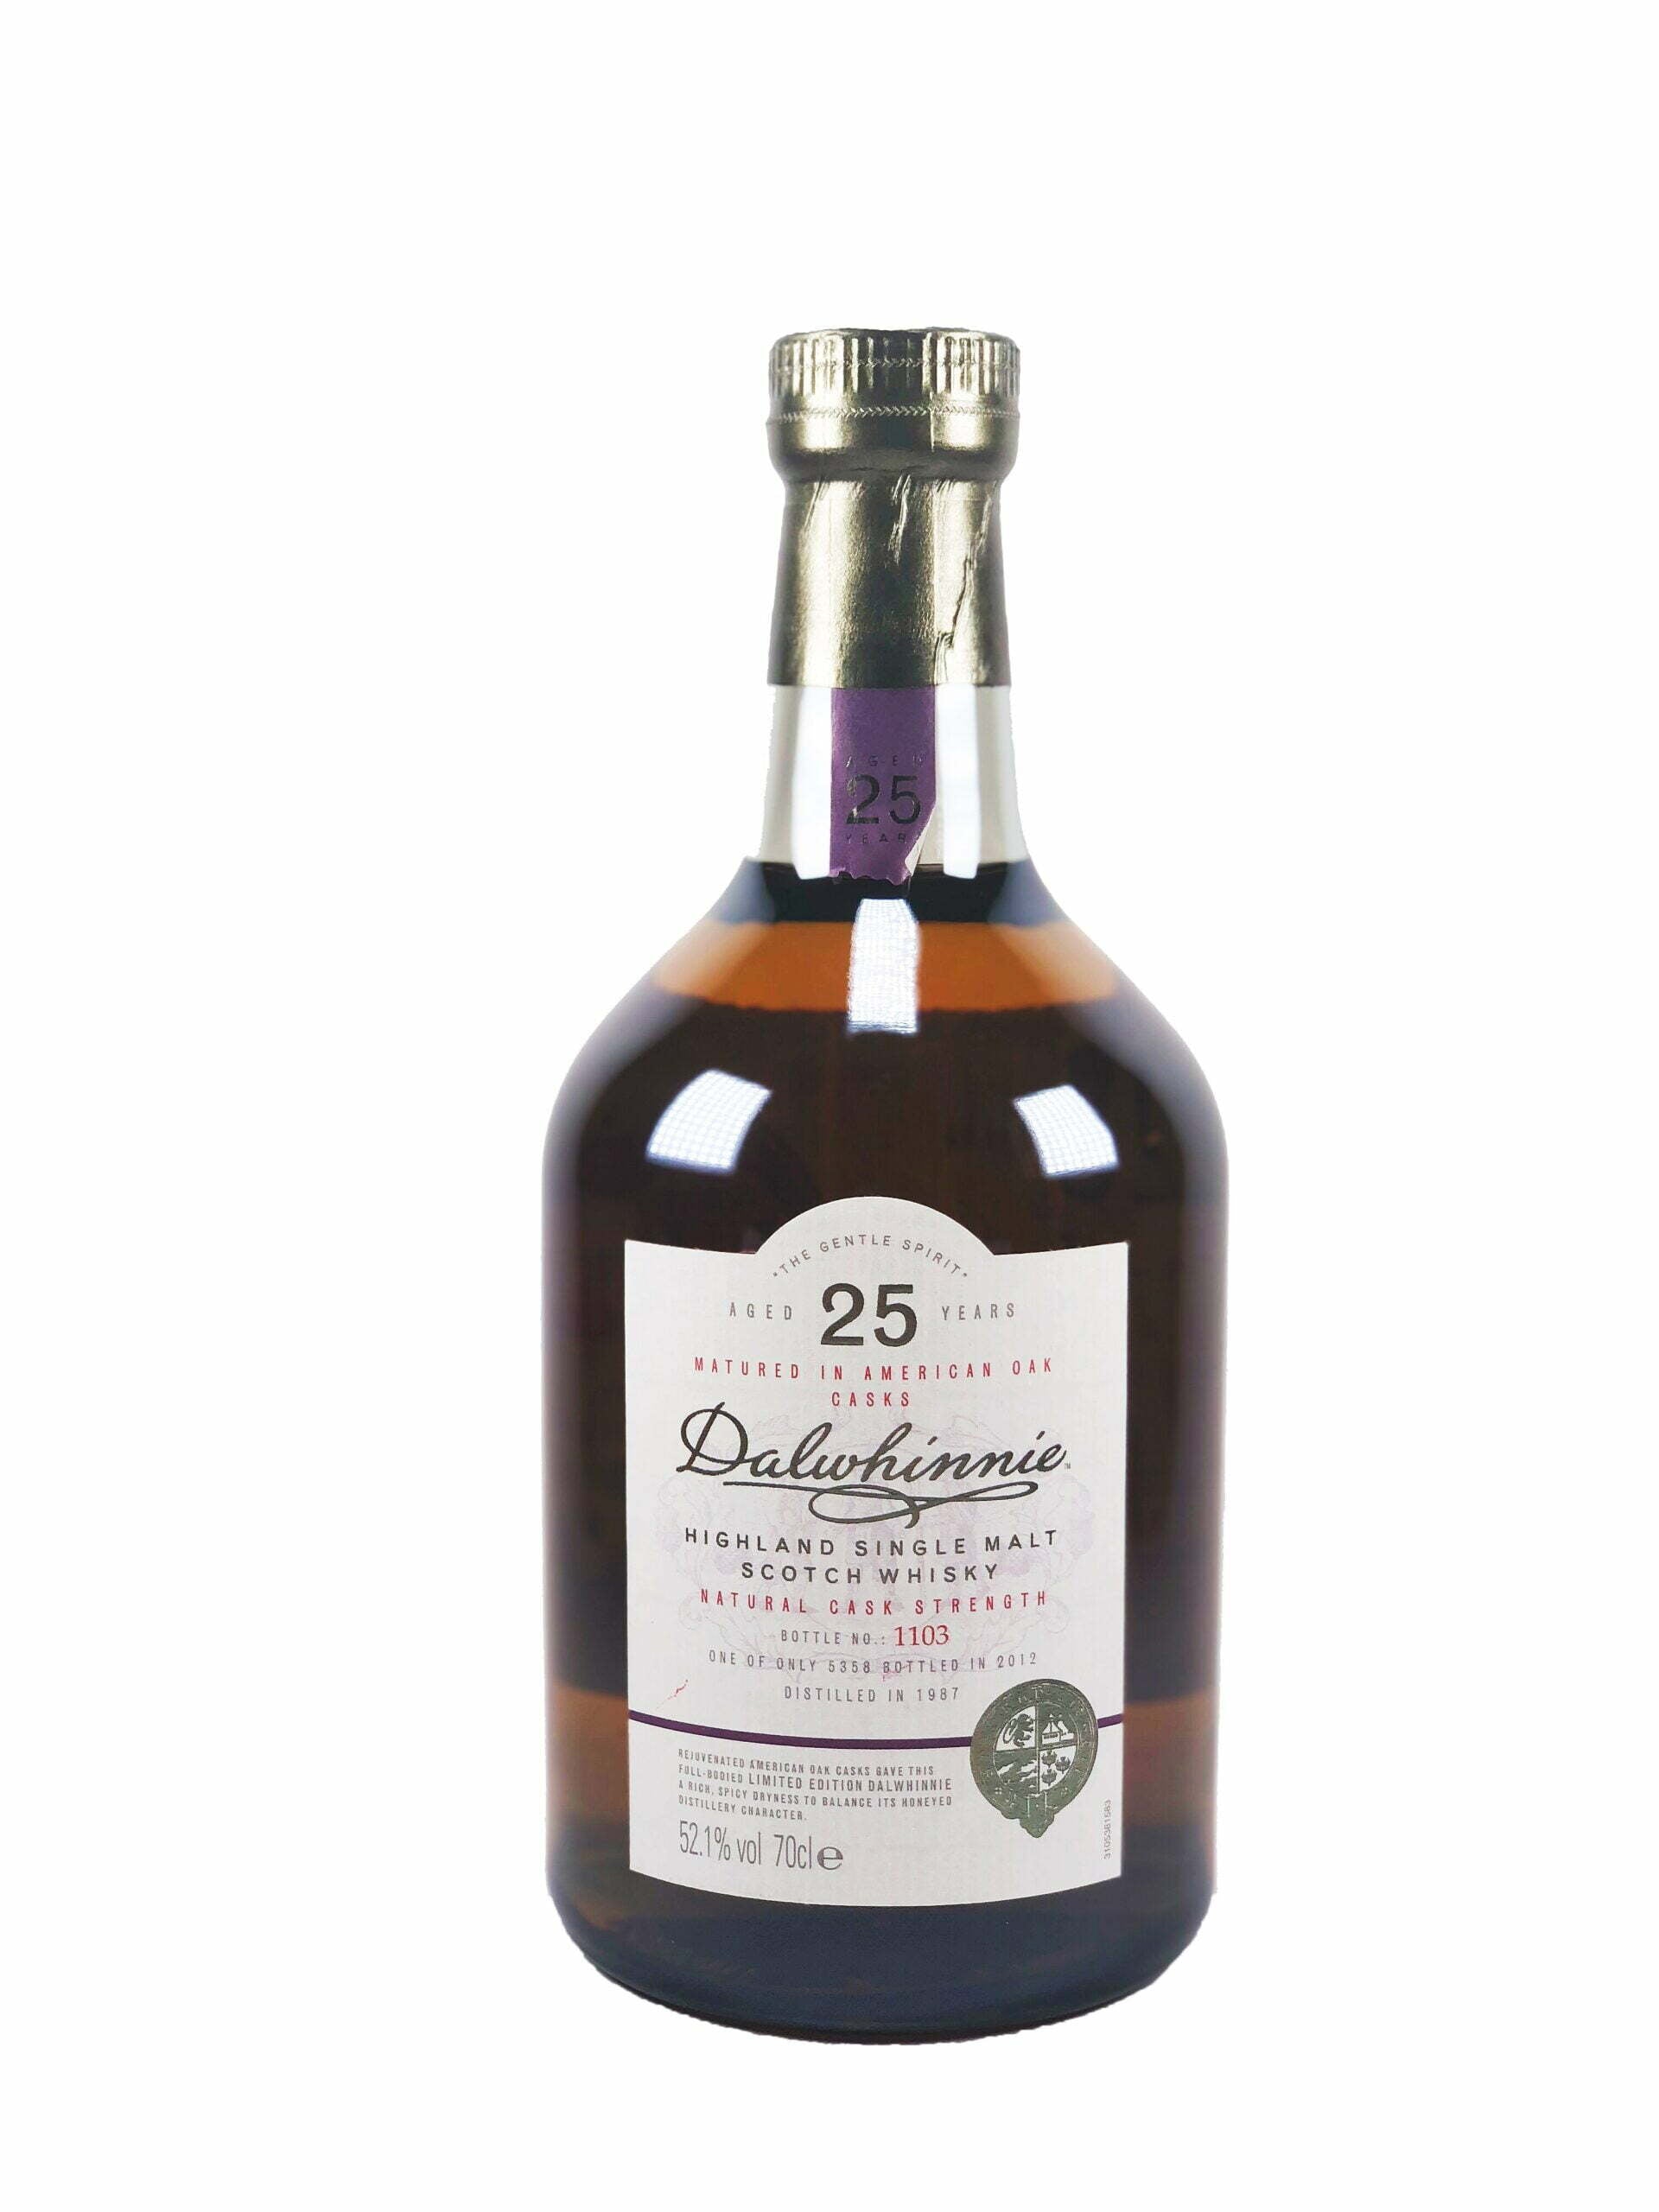 Dalwhinnie 25 Year Old Natural Cask Strength 52.1% (1x70cl) - TwoMoreGlasses.com